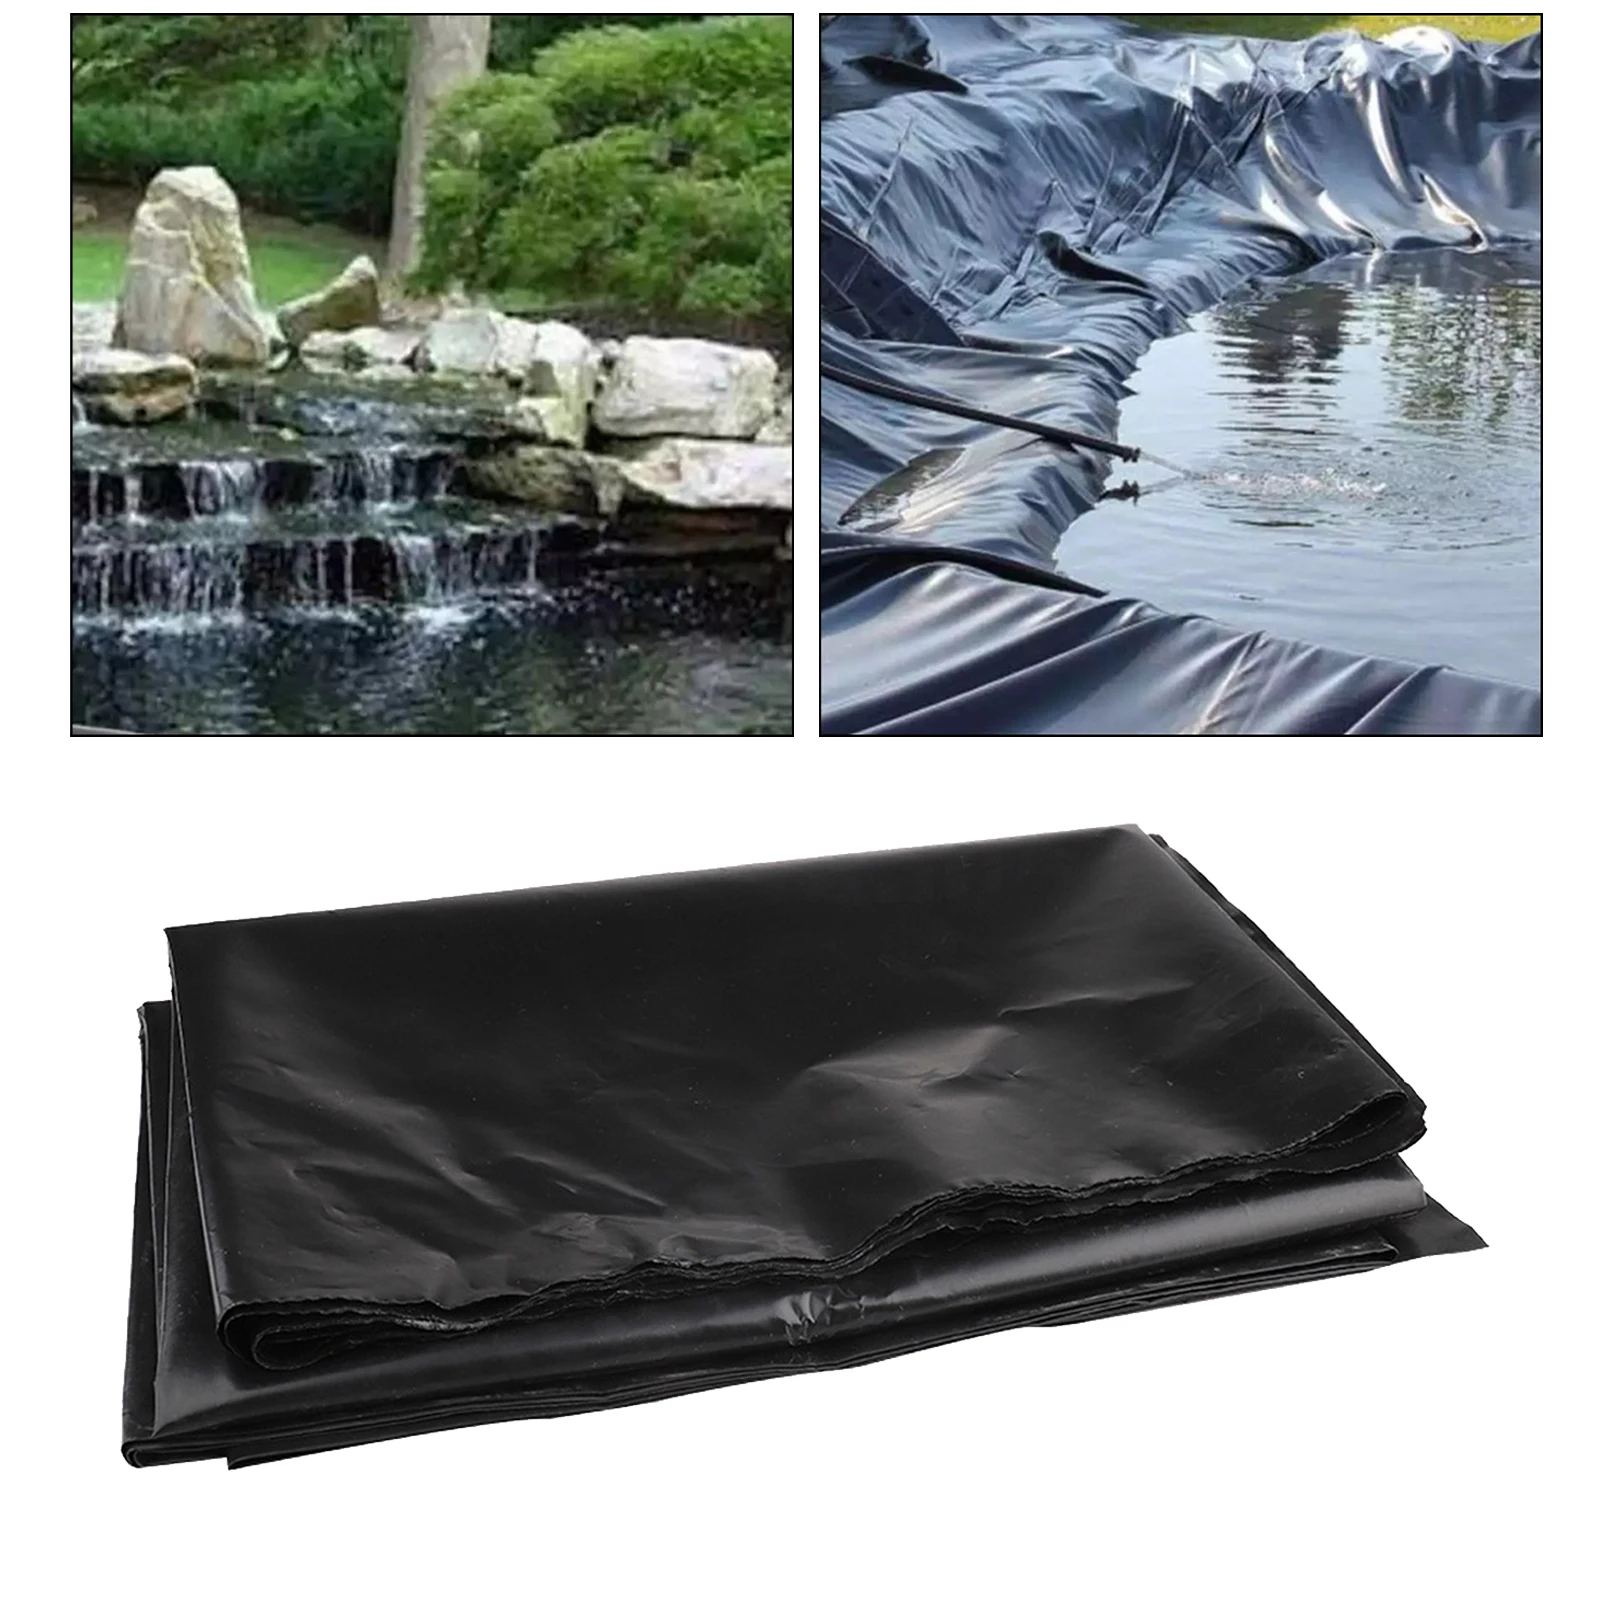 Fish Pond Liners Pool Pond Waterproof Liner Cloth for Water Garden